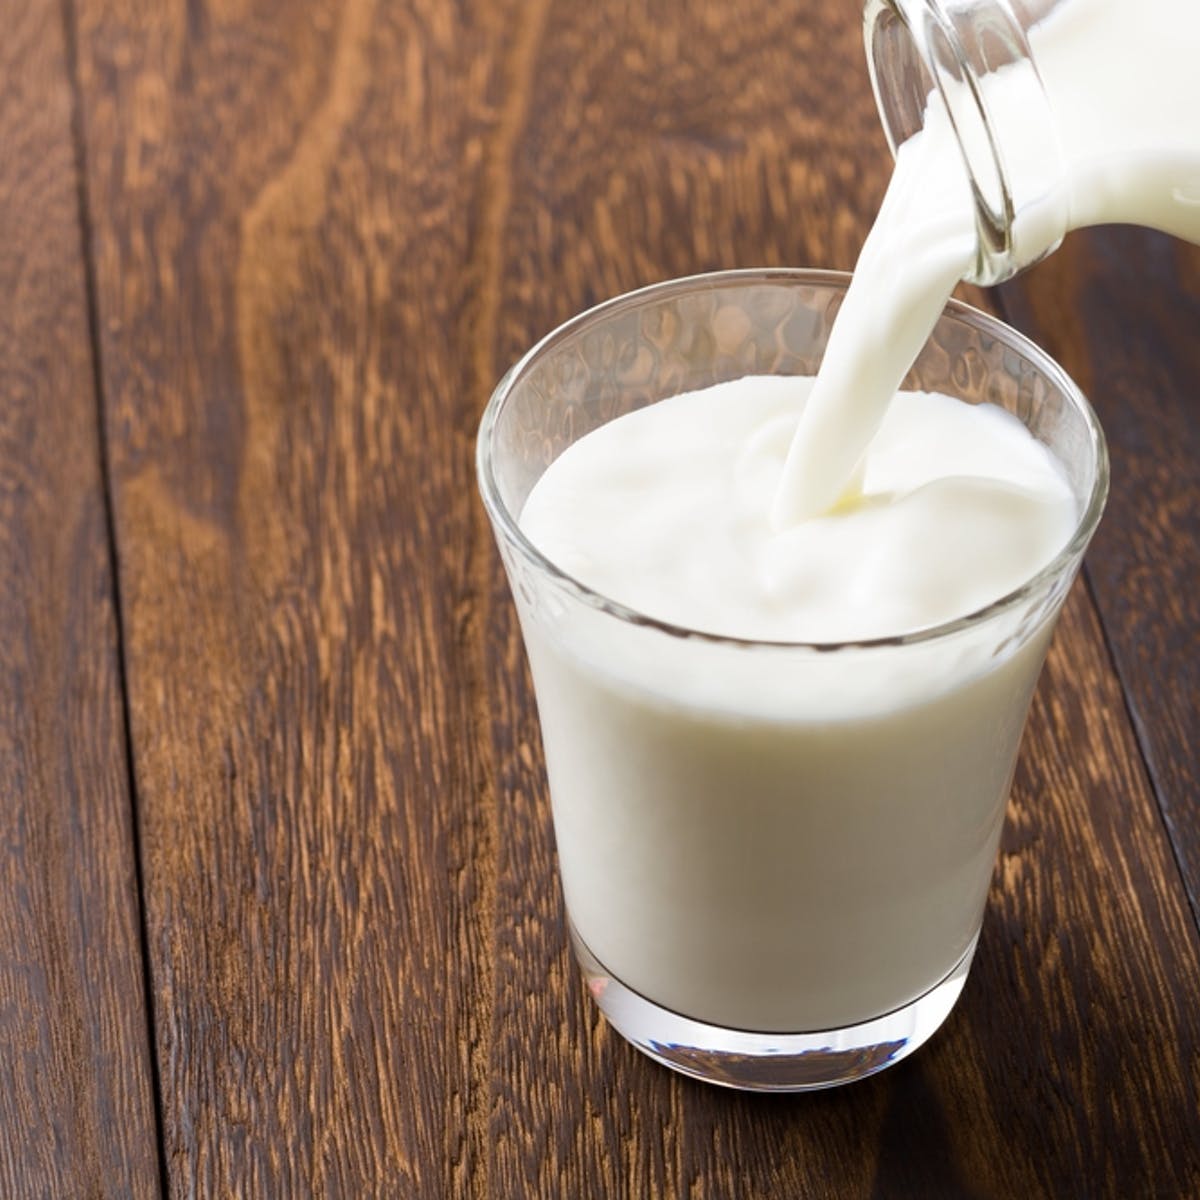 In defence of milk